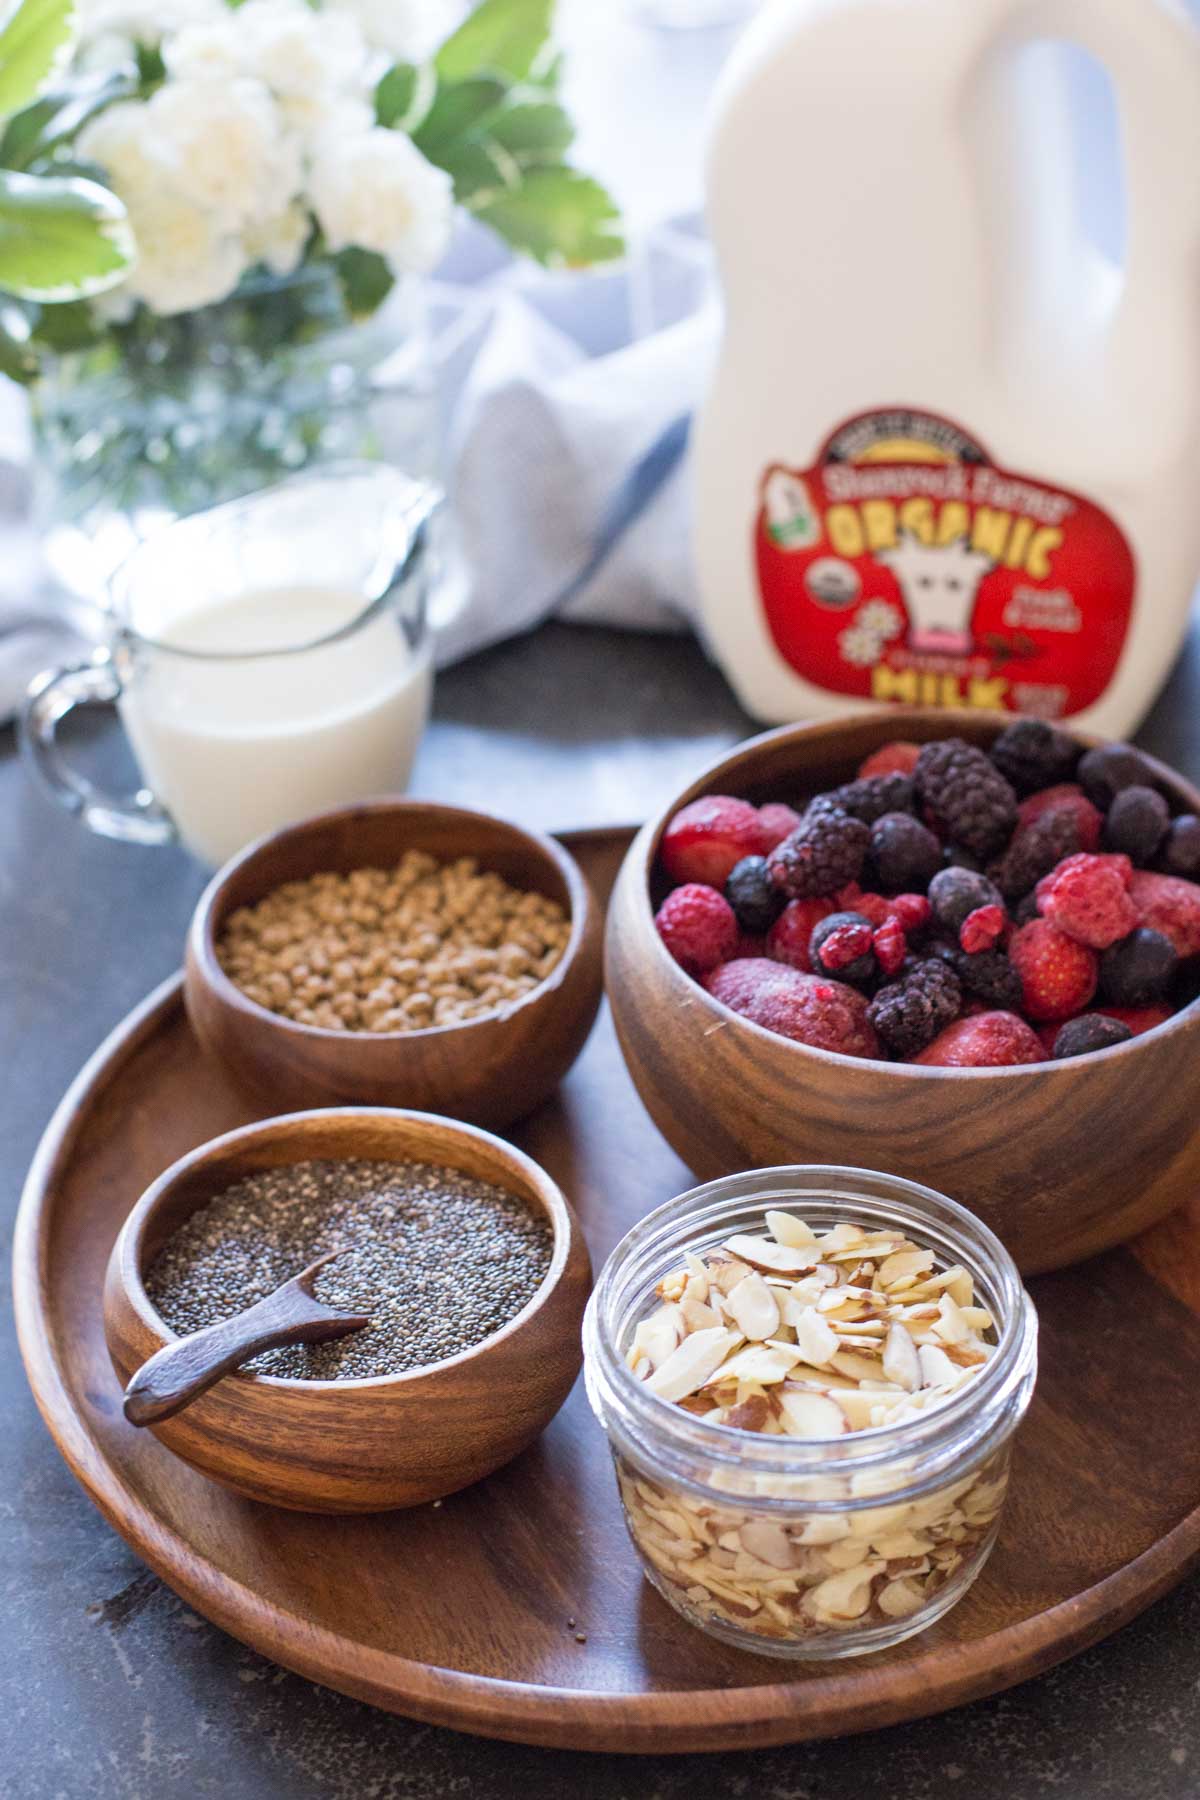 All the ingredients for the Chia Pudding Parfaits - A wood plate with a small wood bowl of bran nuggets, a small wood bowl of chia seeds, a small glass dish of sliced almonds, and a wood bowl of frozen mixed berries, sitting next to a milk jug and a small pour cup of milk. 